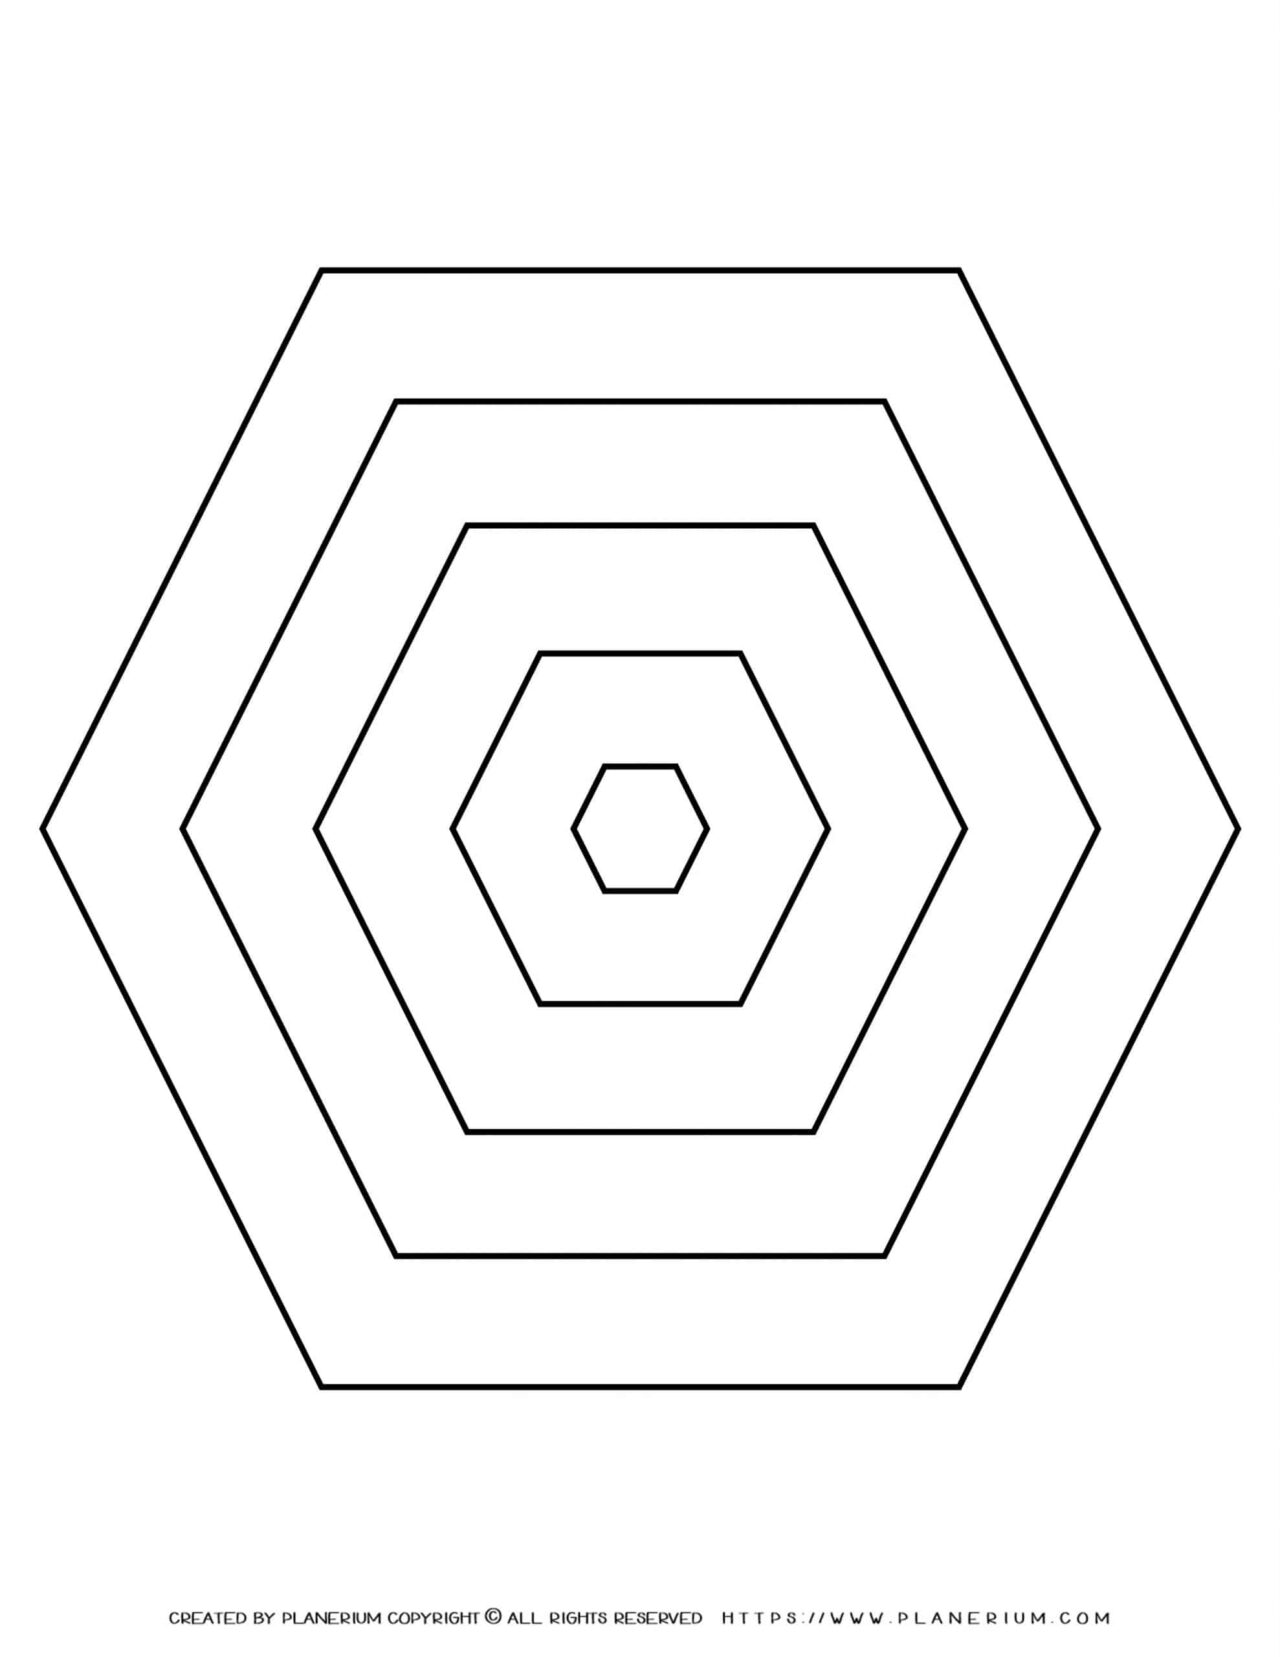 All Seasons - Coloring Page - Five Nested Hexagons